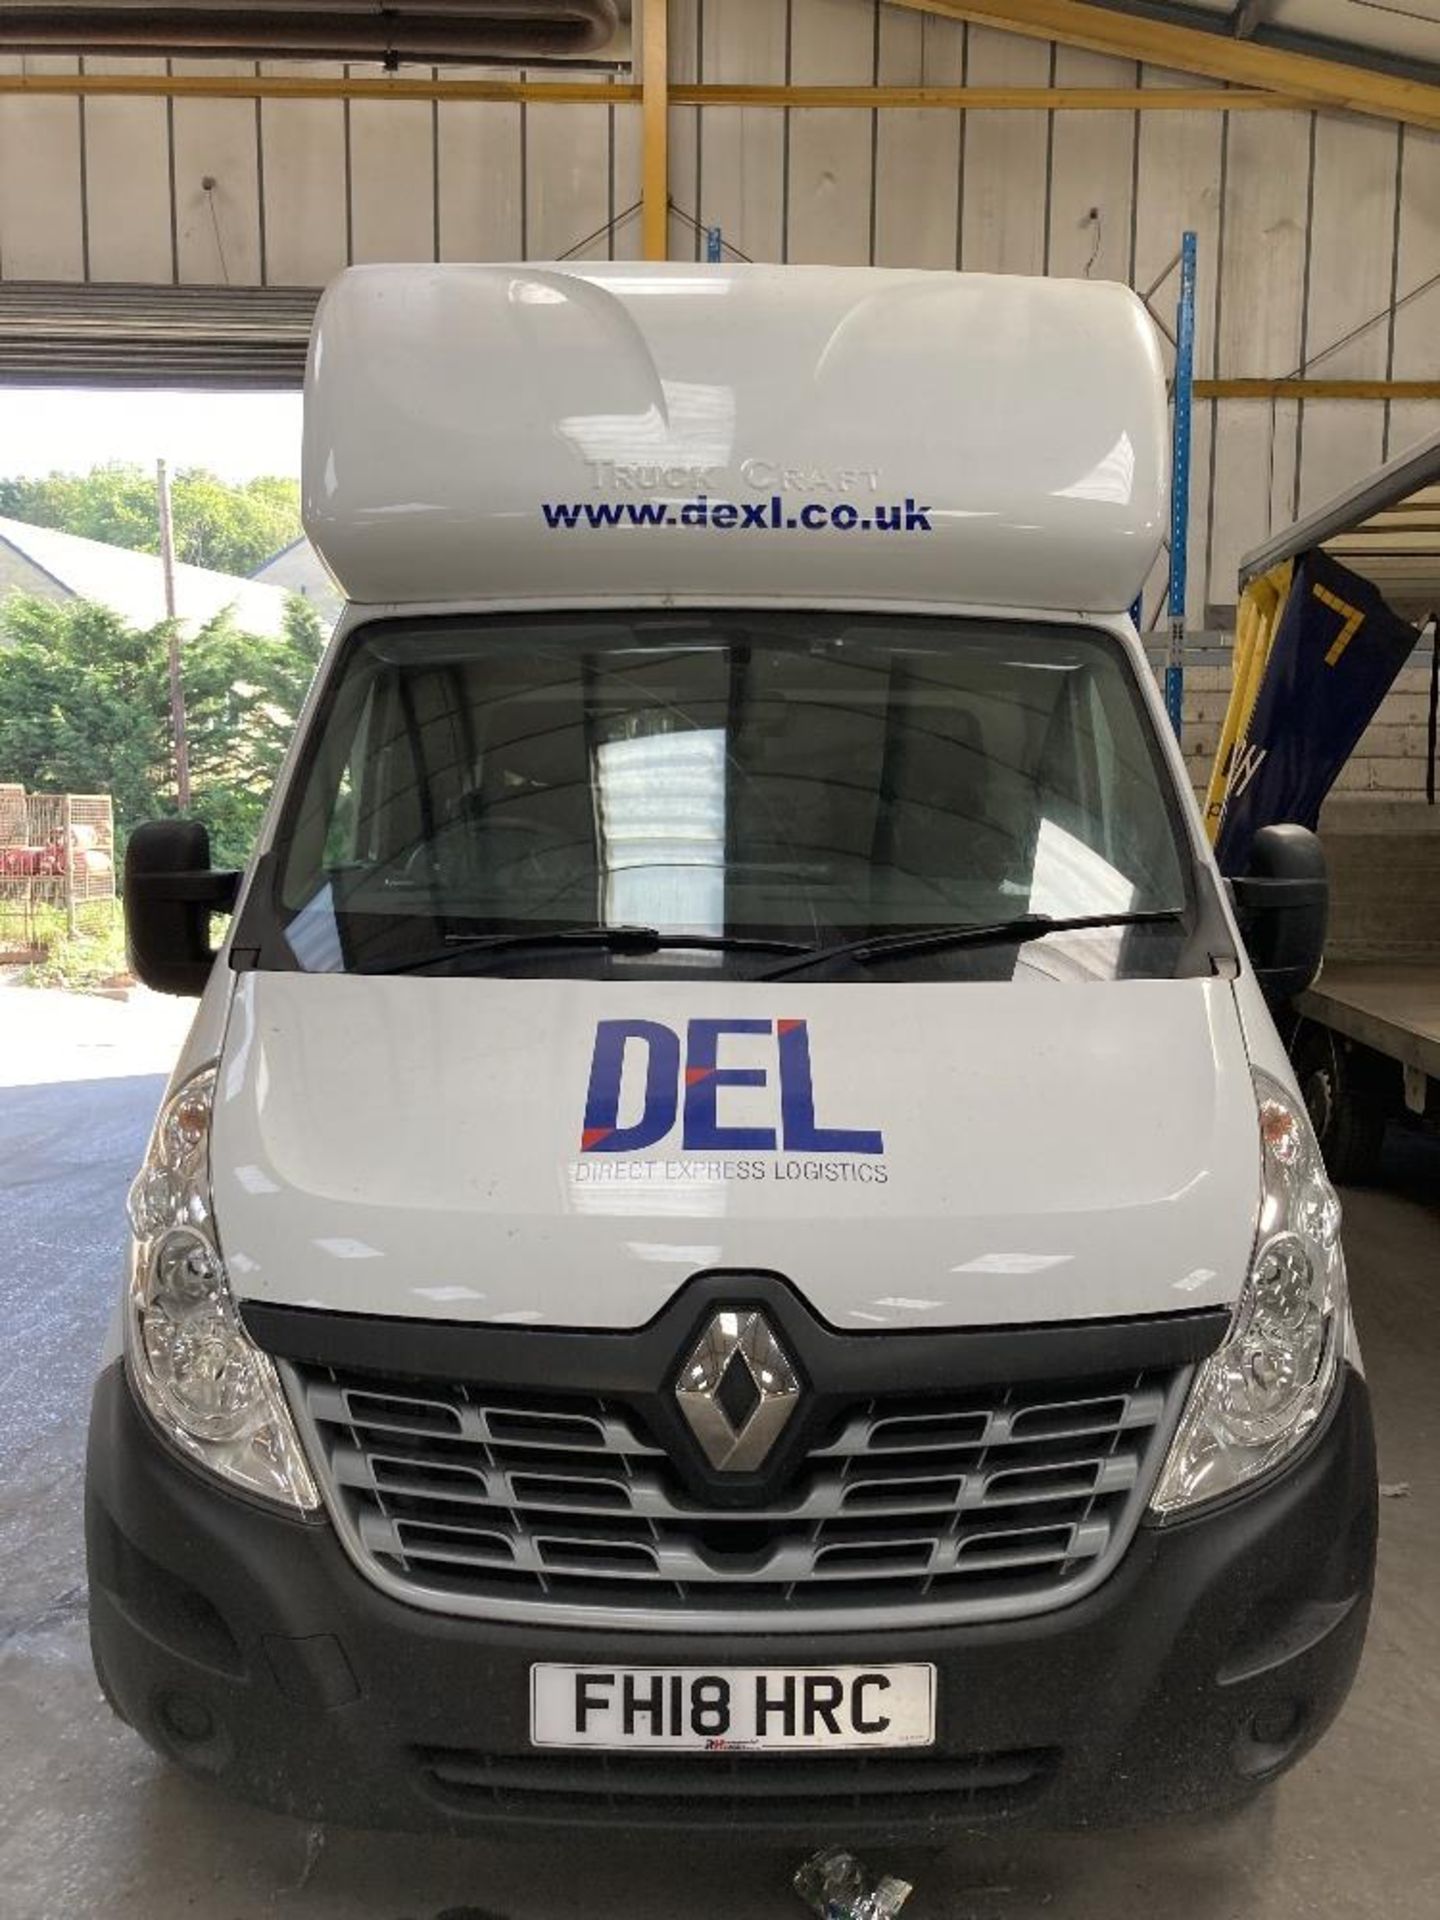 Renault Master L3 DCI130 3T5 Comfort chassis cab curtainside van with DEL 500kg - Image 7 of 22